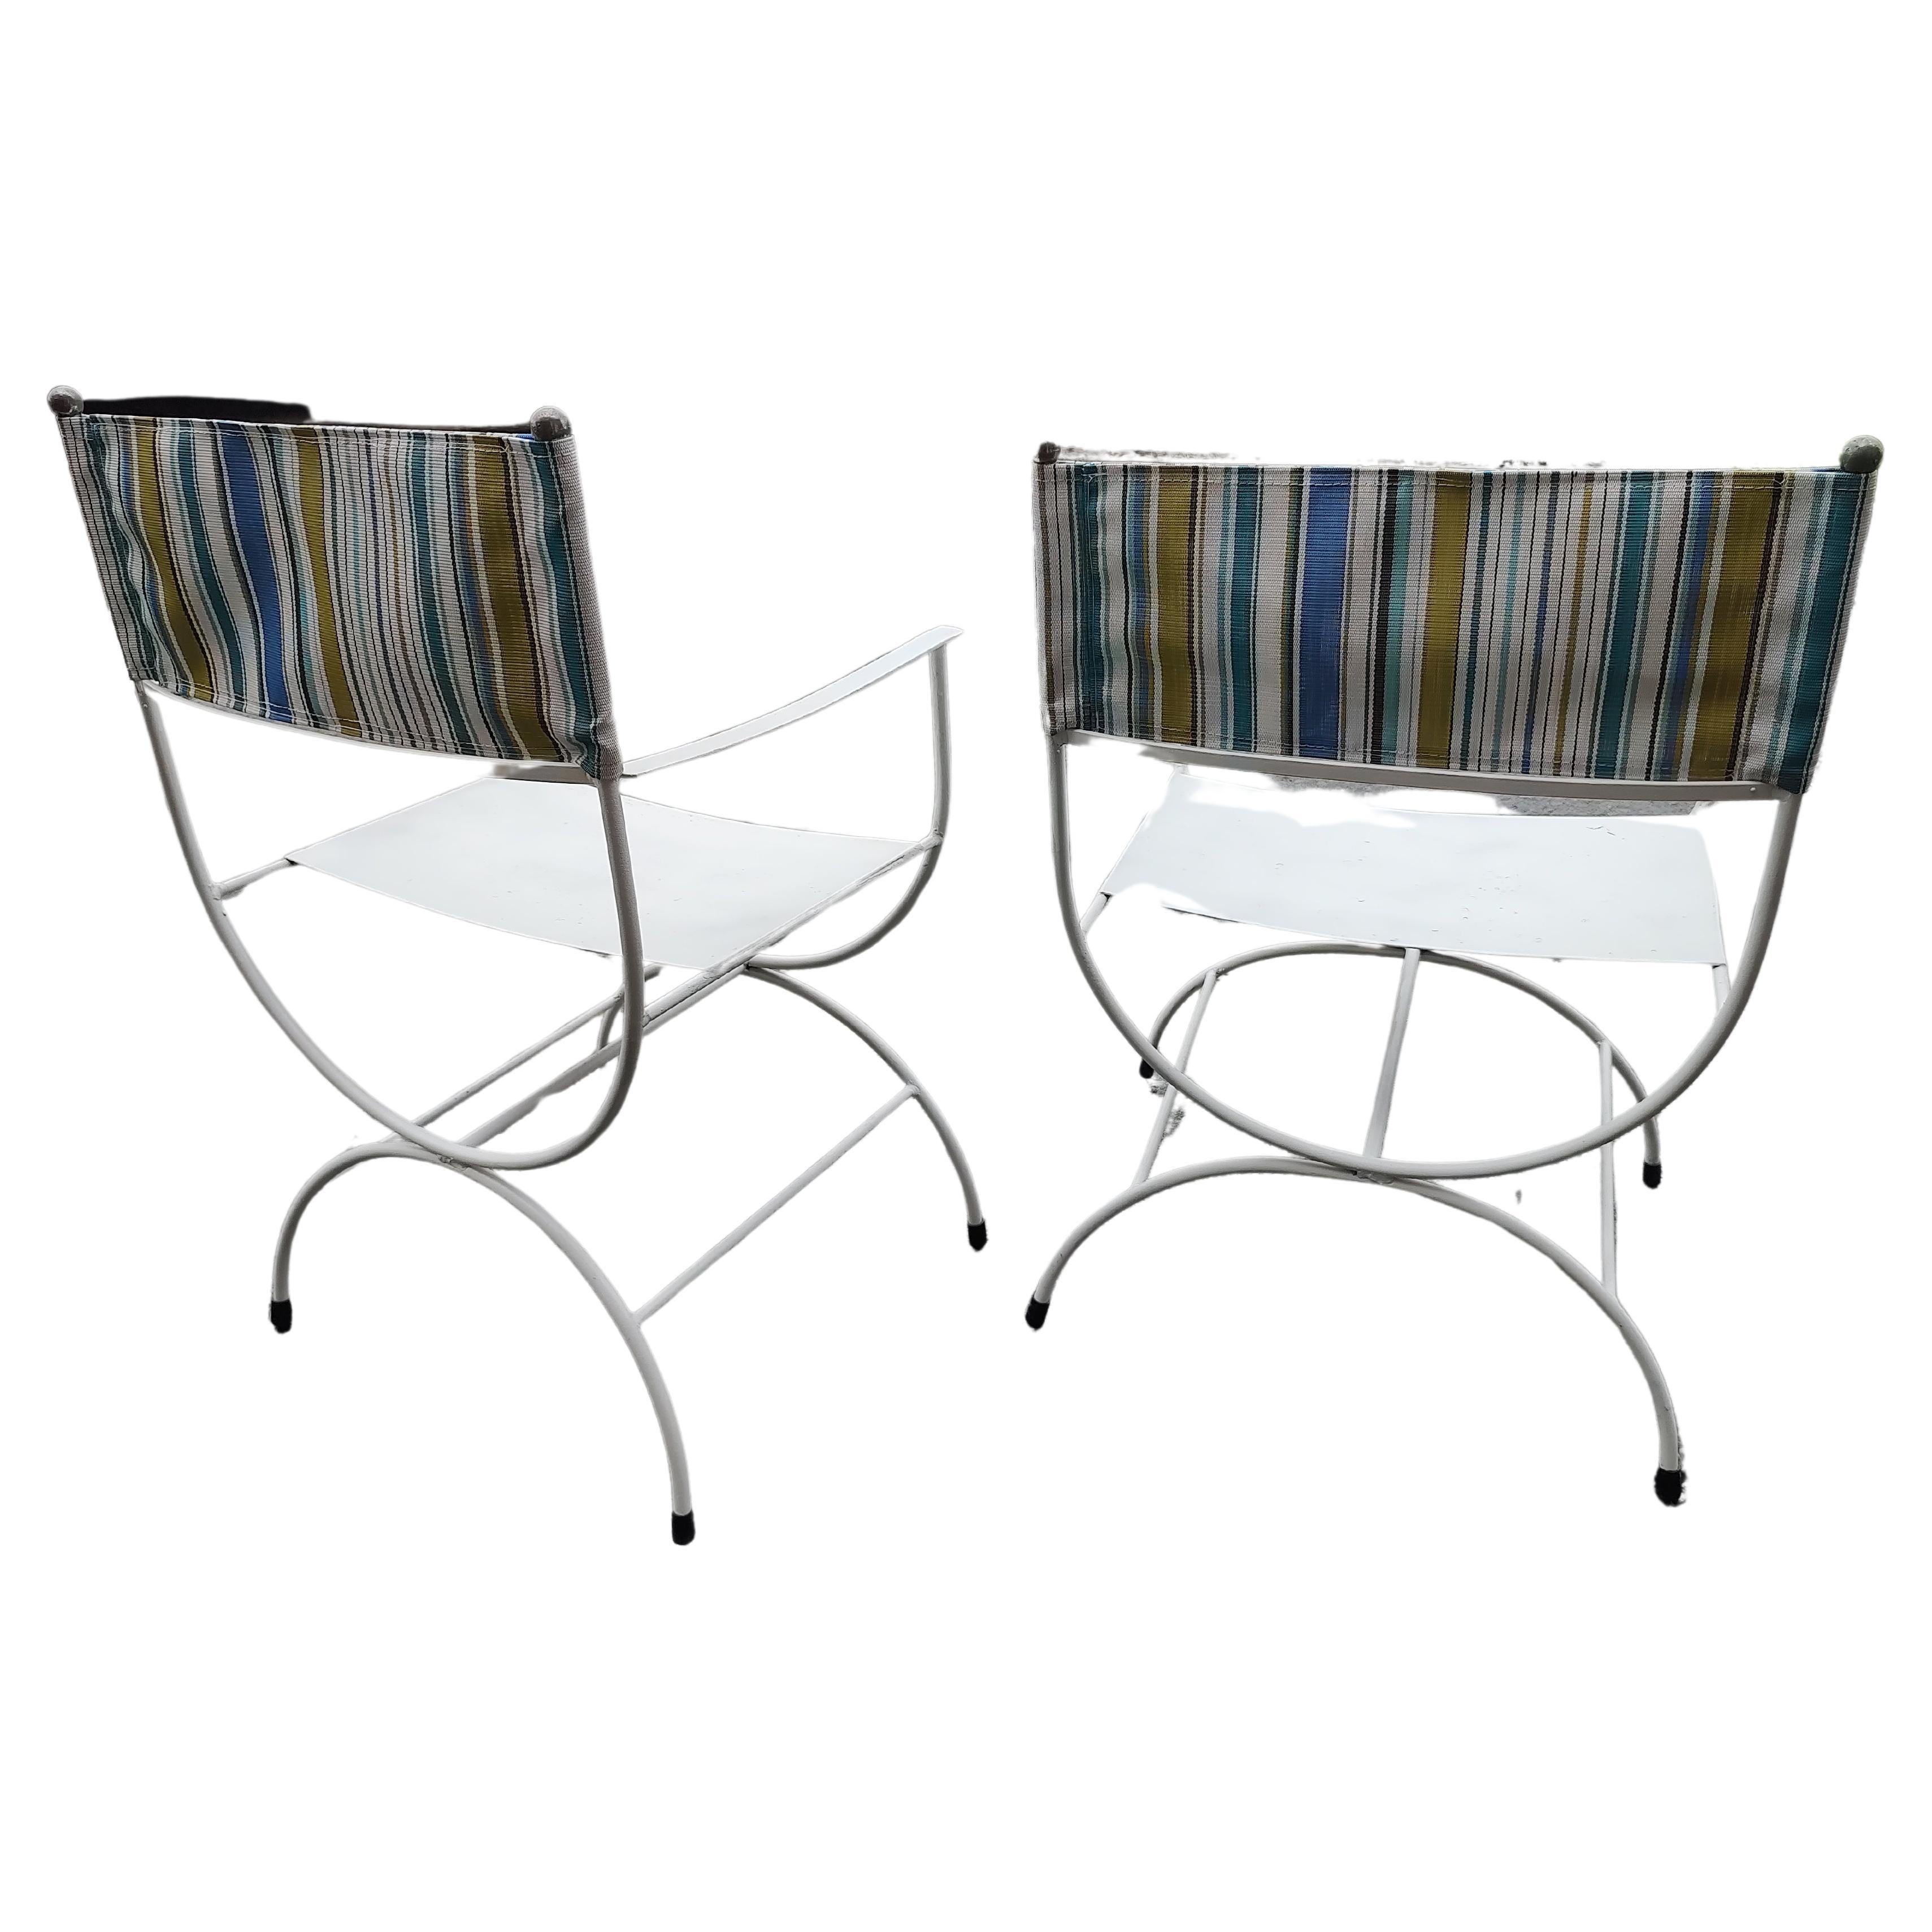 Brass Pair of Mid Century Modern Patio Directors Chairs with Sunbrella Backs 1960 For Sale